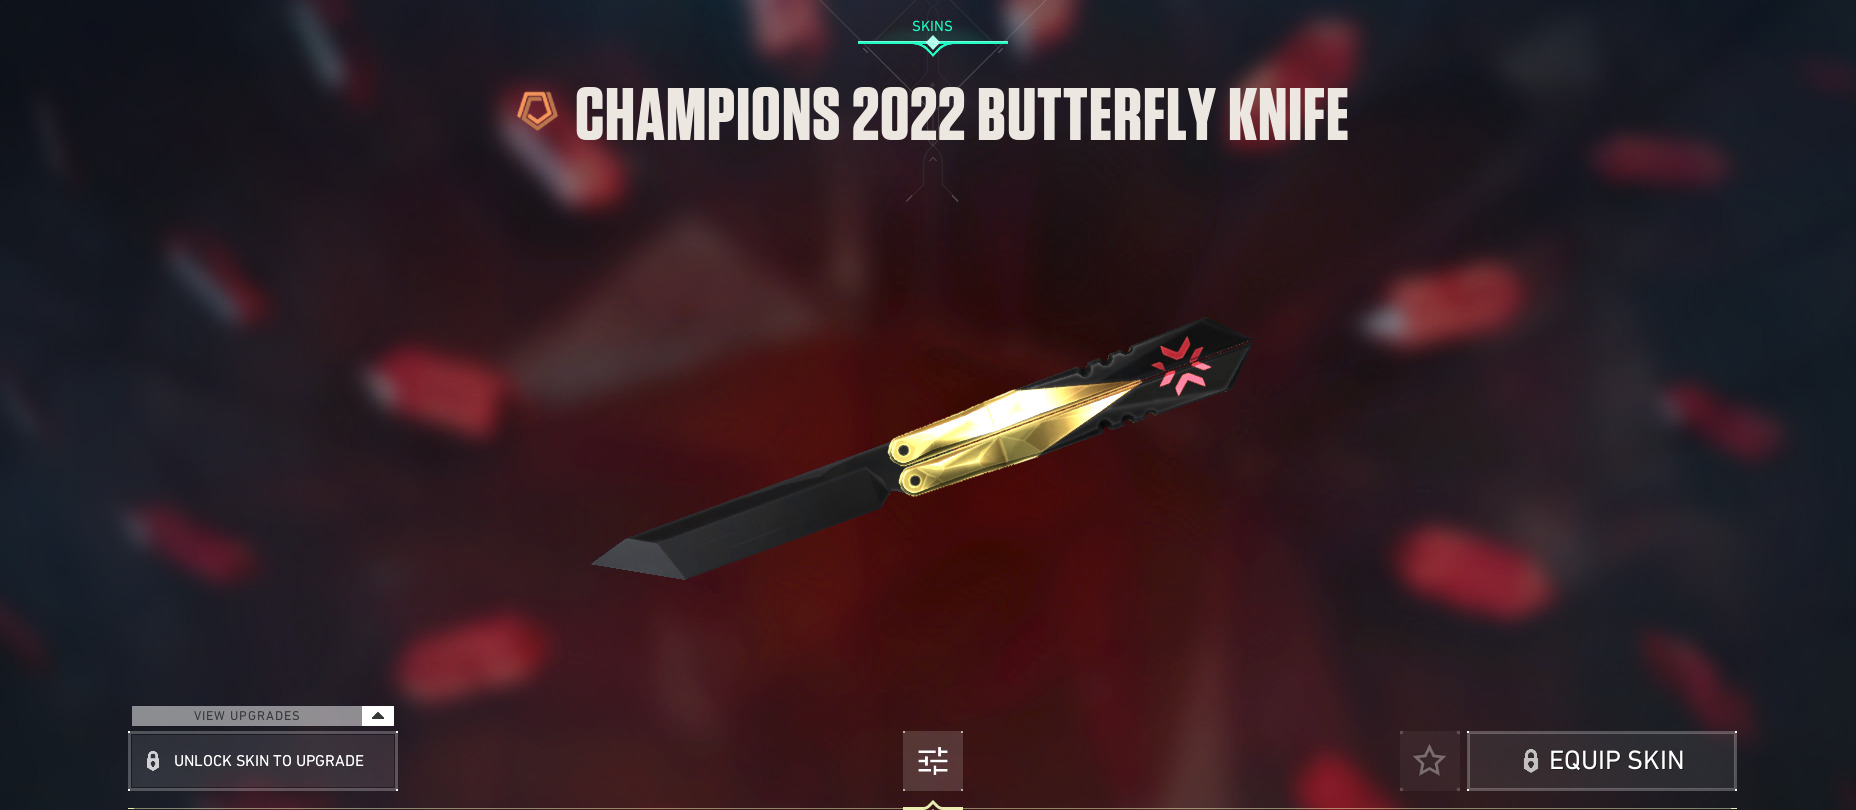 Valorant Champions 2022 Butterfly Knife